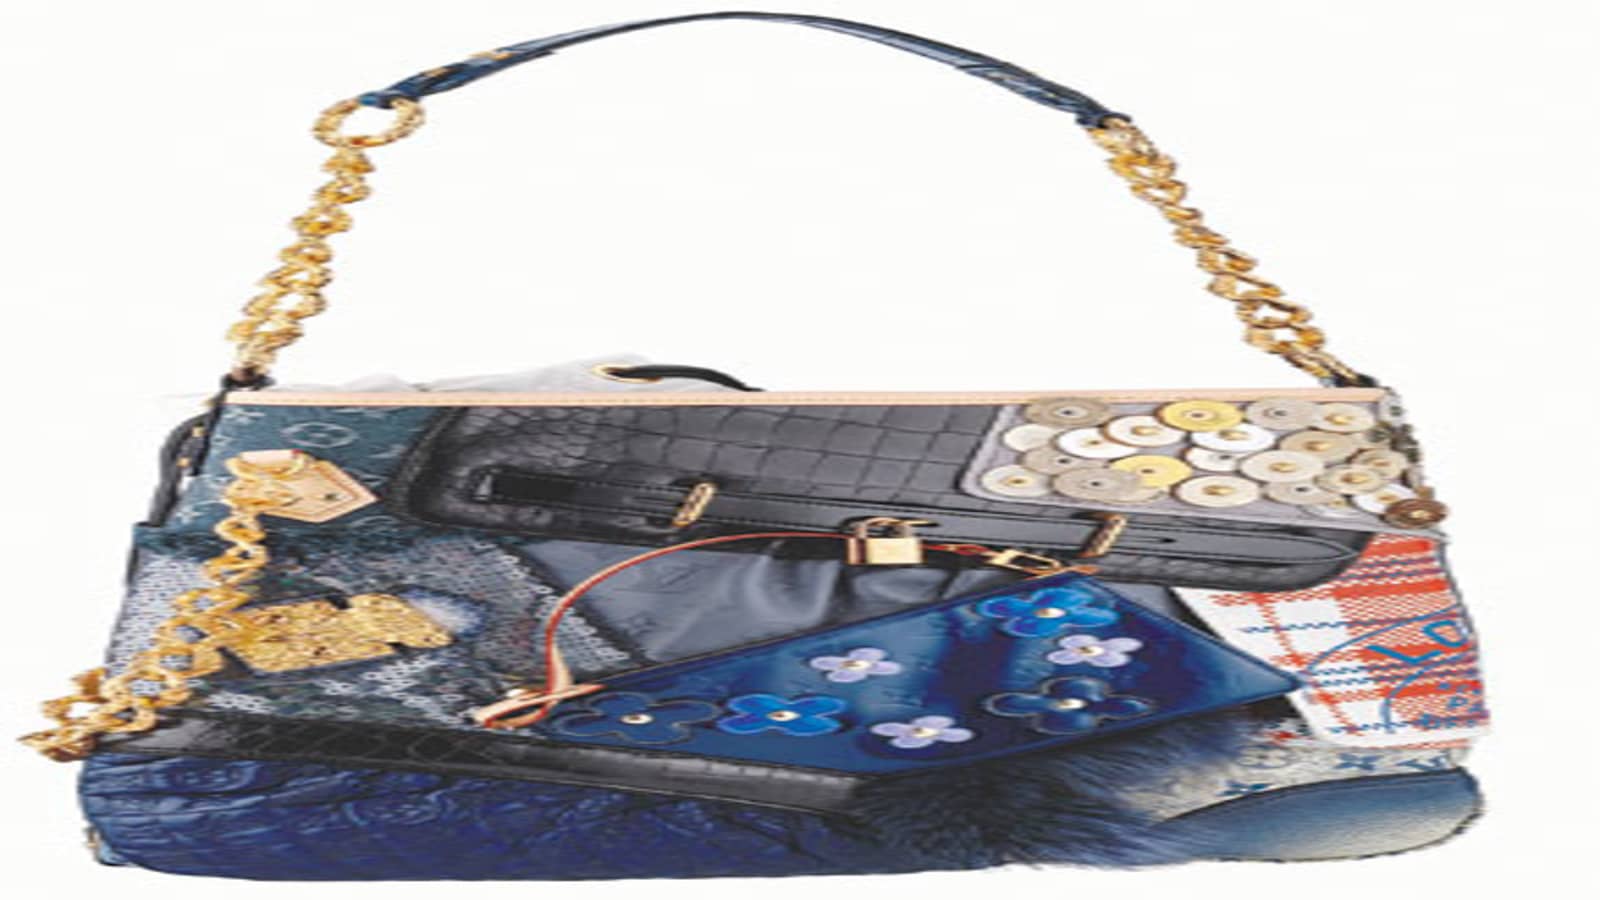 LV TRIBUTE PATCHWORK BAG 2007. What a concept!!!  Most expensive handbags,  Expensive handbags, Most expensive bag